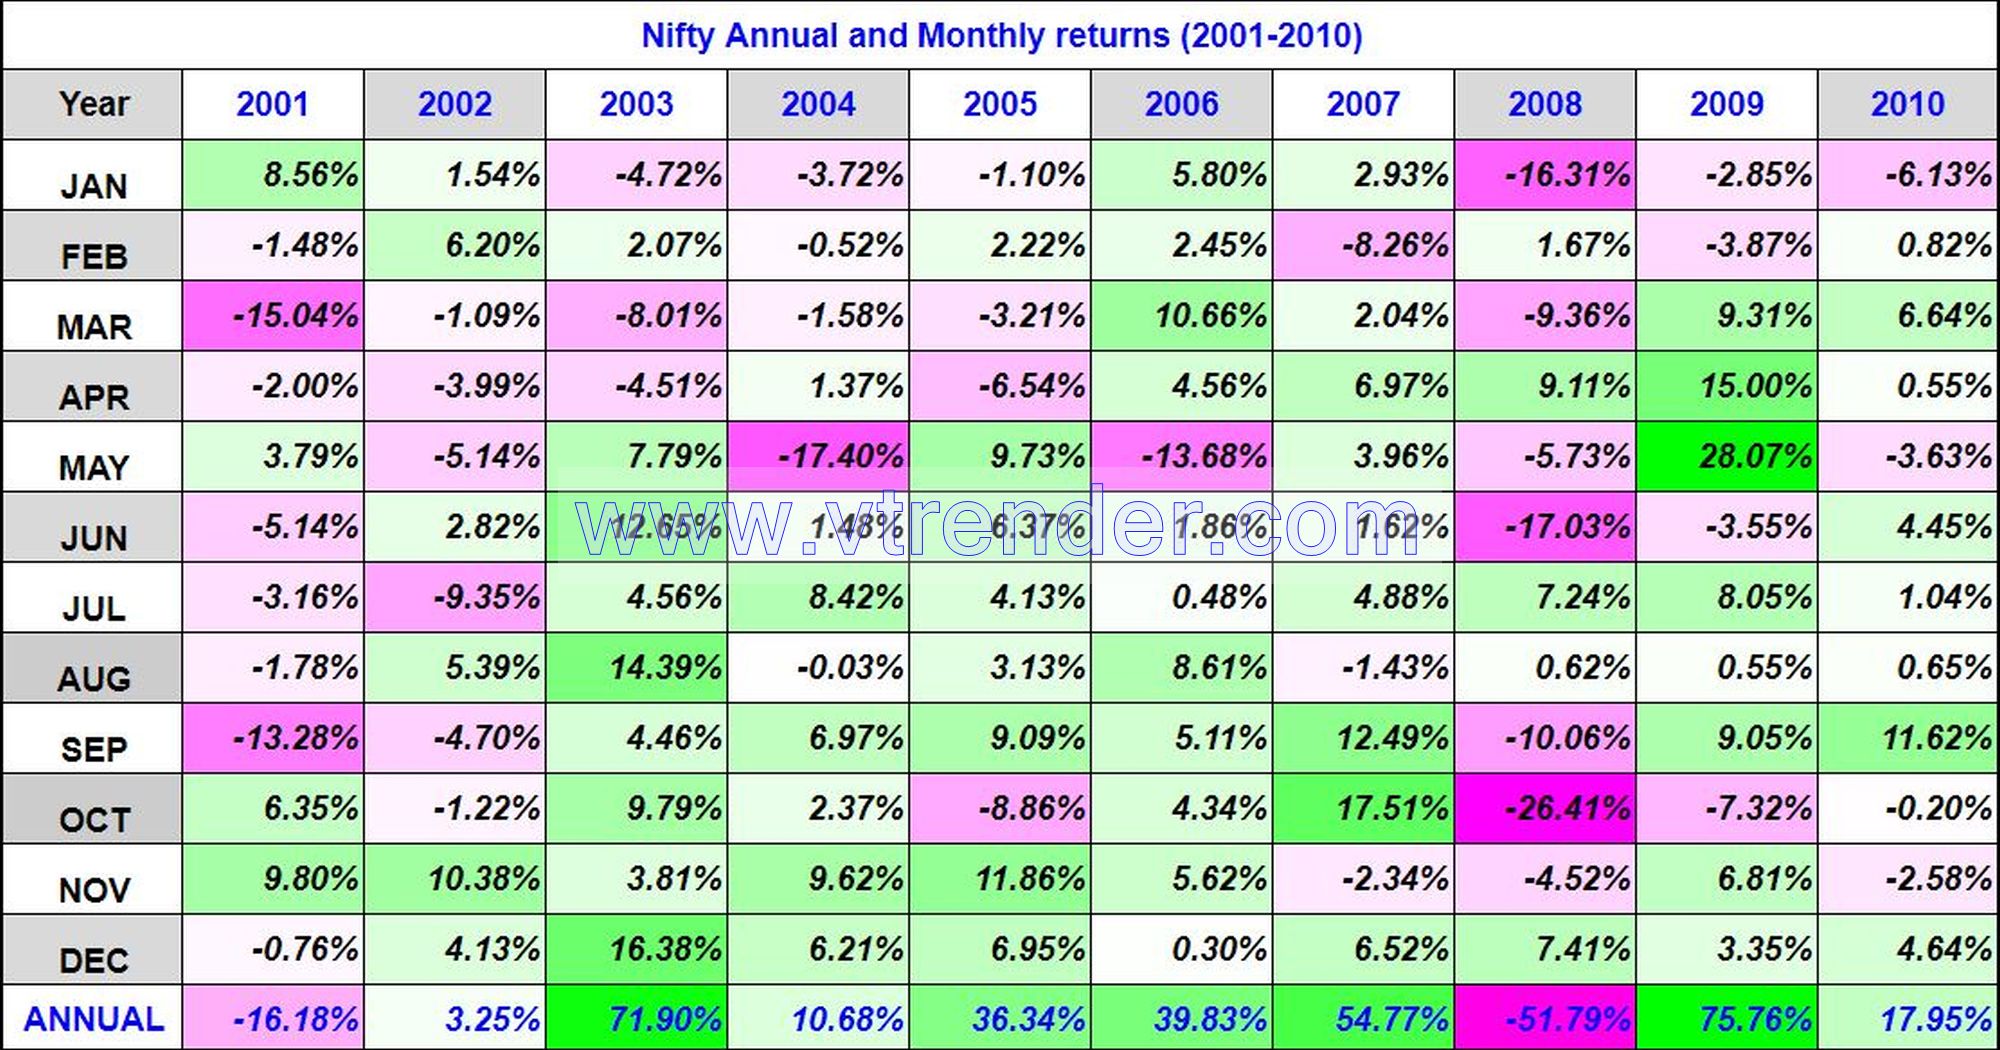 Niftyreturns2001 2010 Nifty 50 Monthly And Annual Returns (1991-2022) Updated 30Th Dec 2022 Annual, Monthly, Nifty Returns